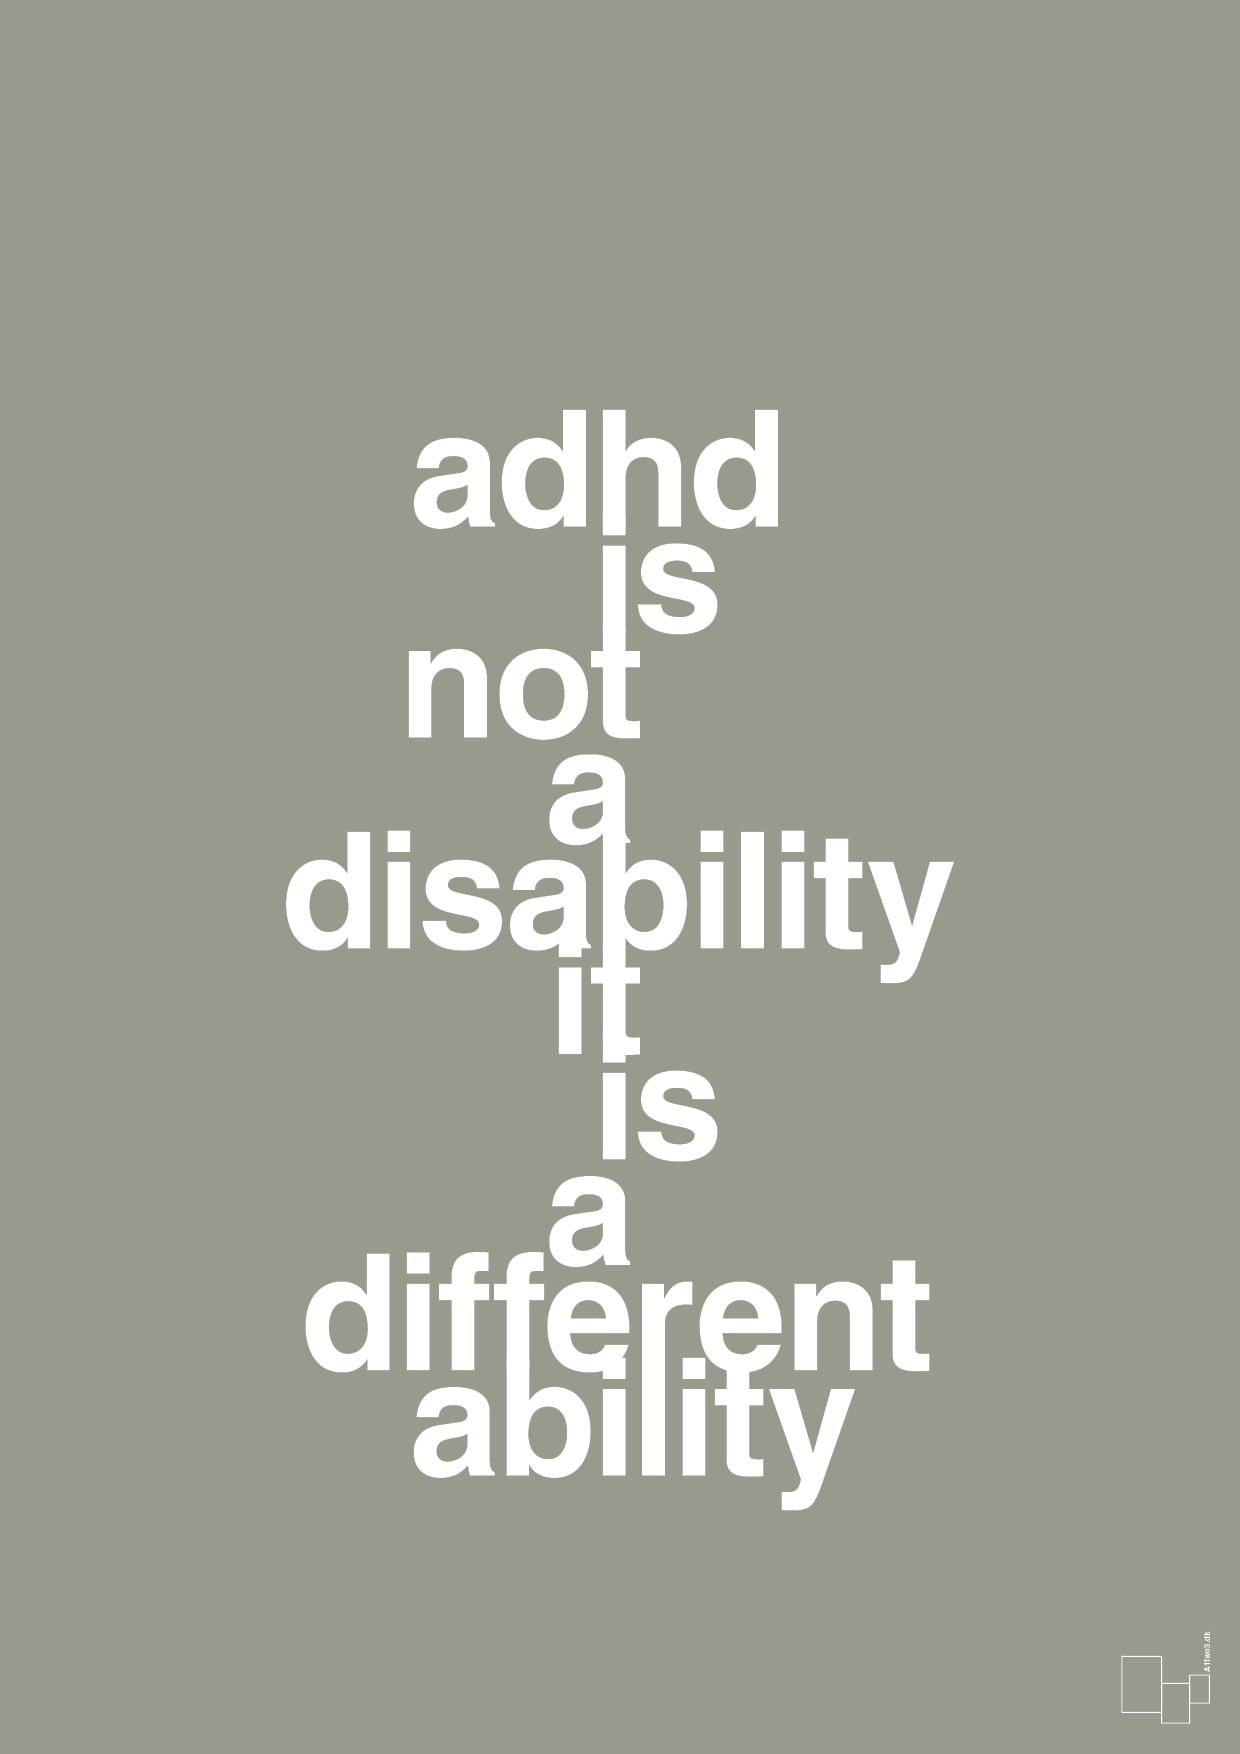 adhd is not a disability it is a different ability - Plakat med Samfund i Battleship Gray